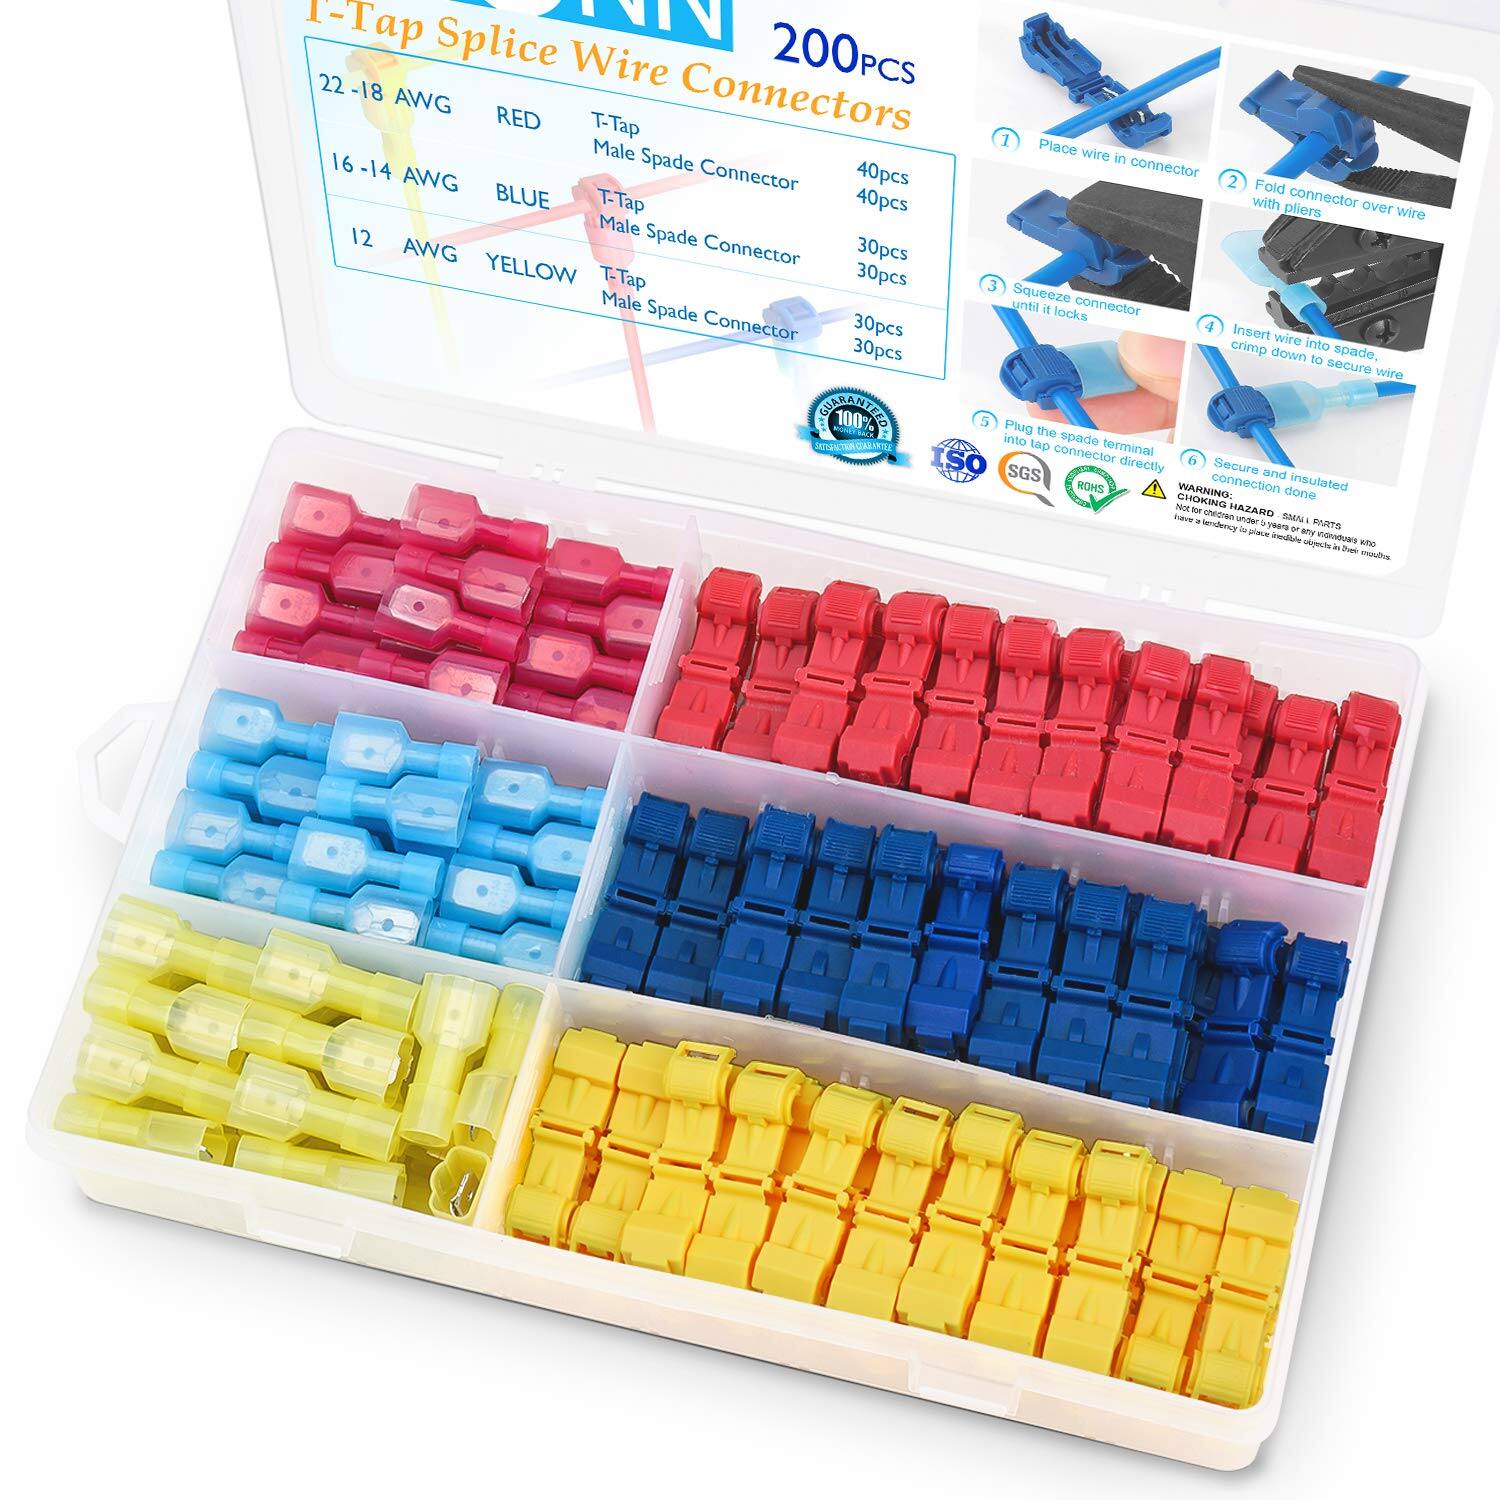 200pcs T-Tap Wire Connectors $8.21 + Free Shipping w/ Prime or Orders $25+